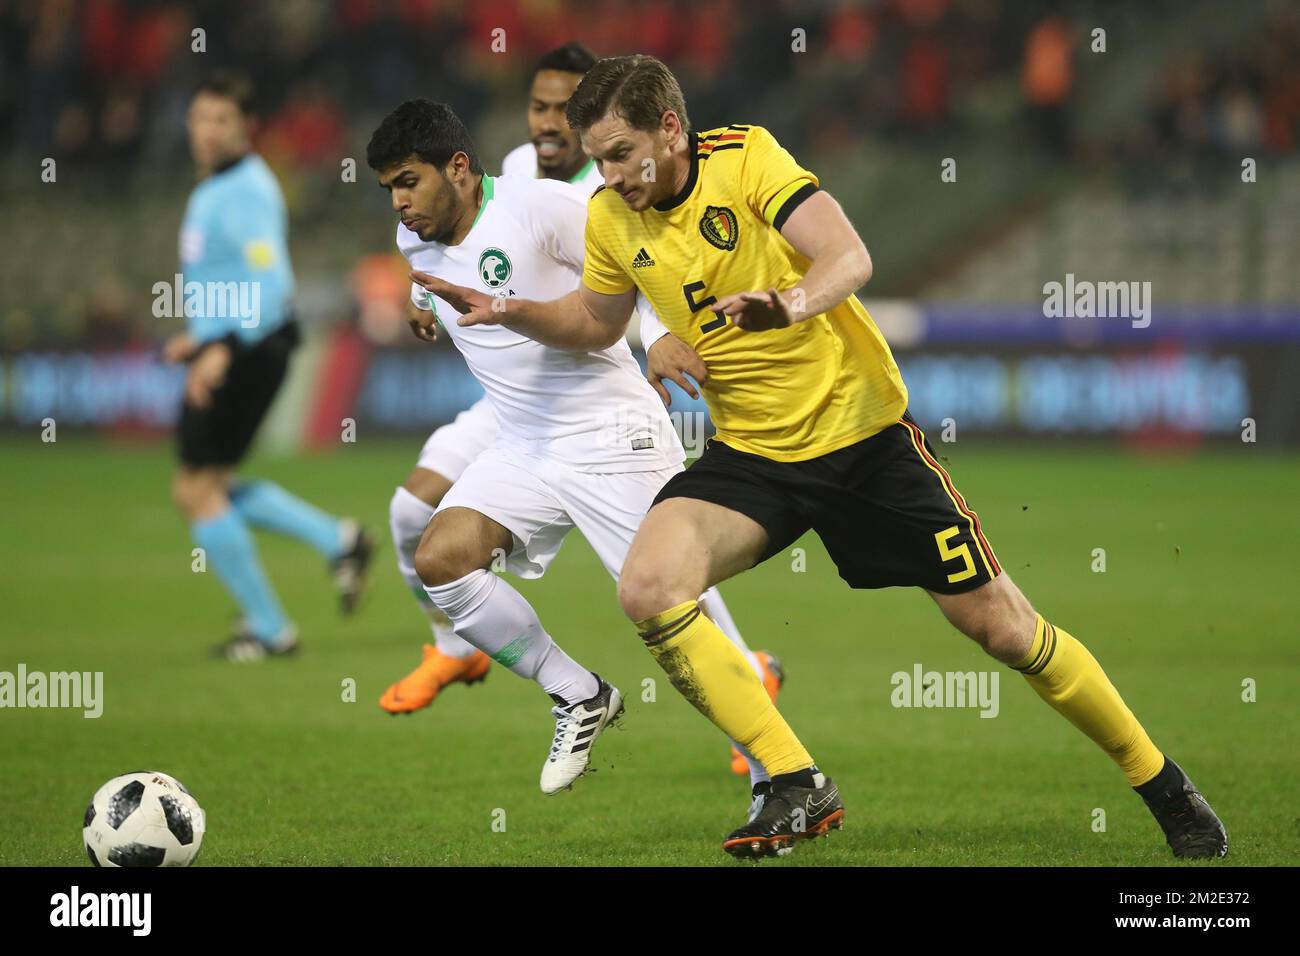 Saudi Arabia's midfielder Yahya Al-Shehri and Belgium's Jan Vertonghen fight for the ball during a friendly game between the Red Devils Belgian National soccer team and Saudi Arabia, in Brussels, Tuesday 27 March 2018. BELGA PHOTO BRUNO FAHY Stock Photo